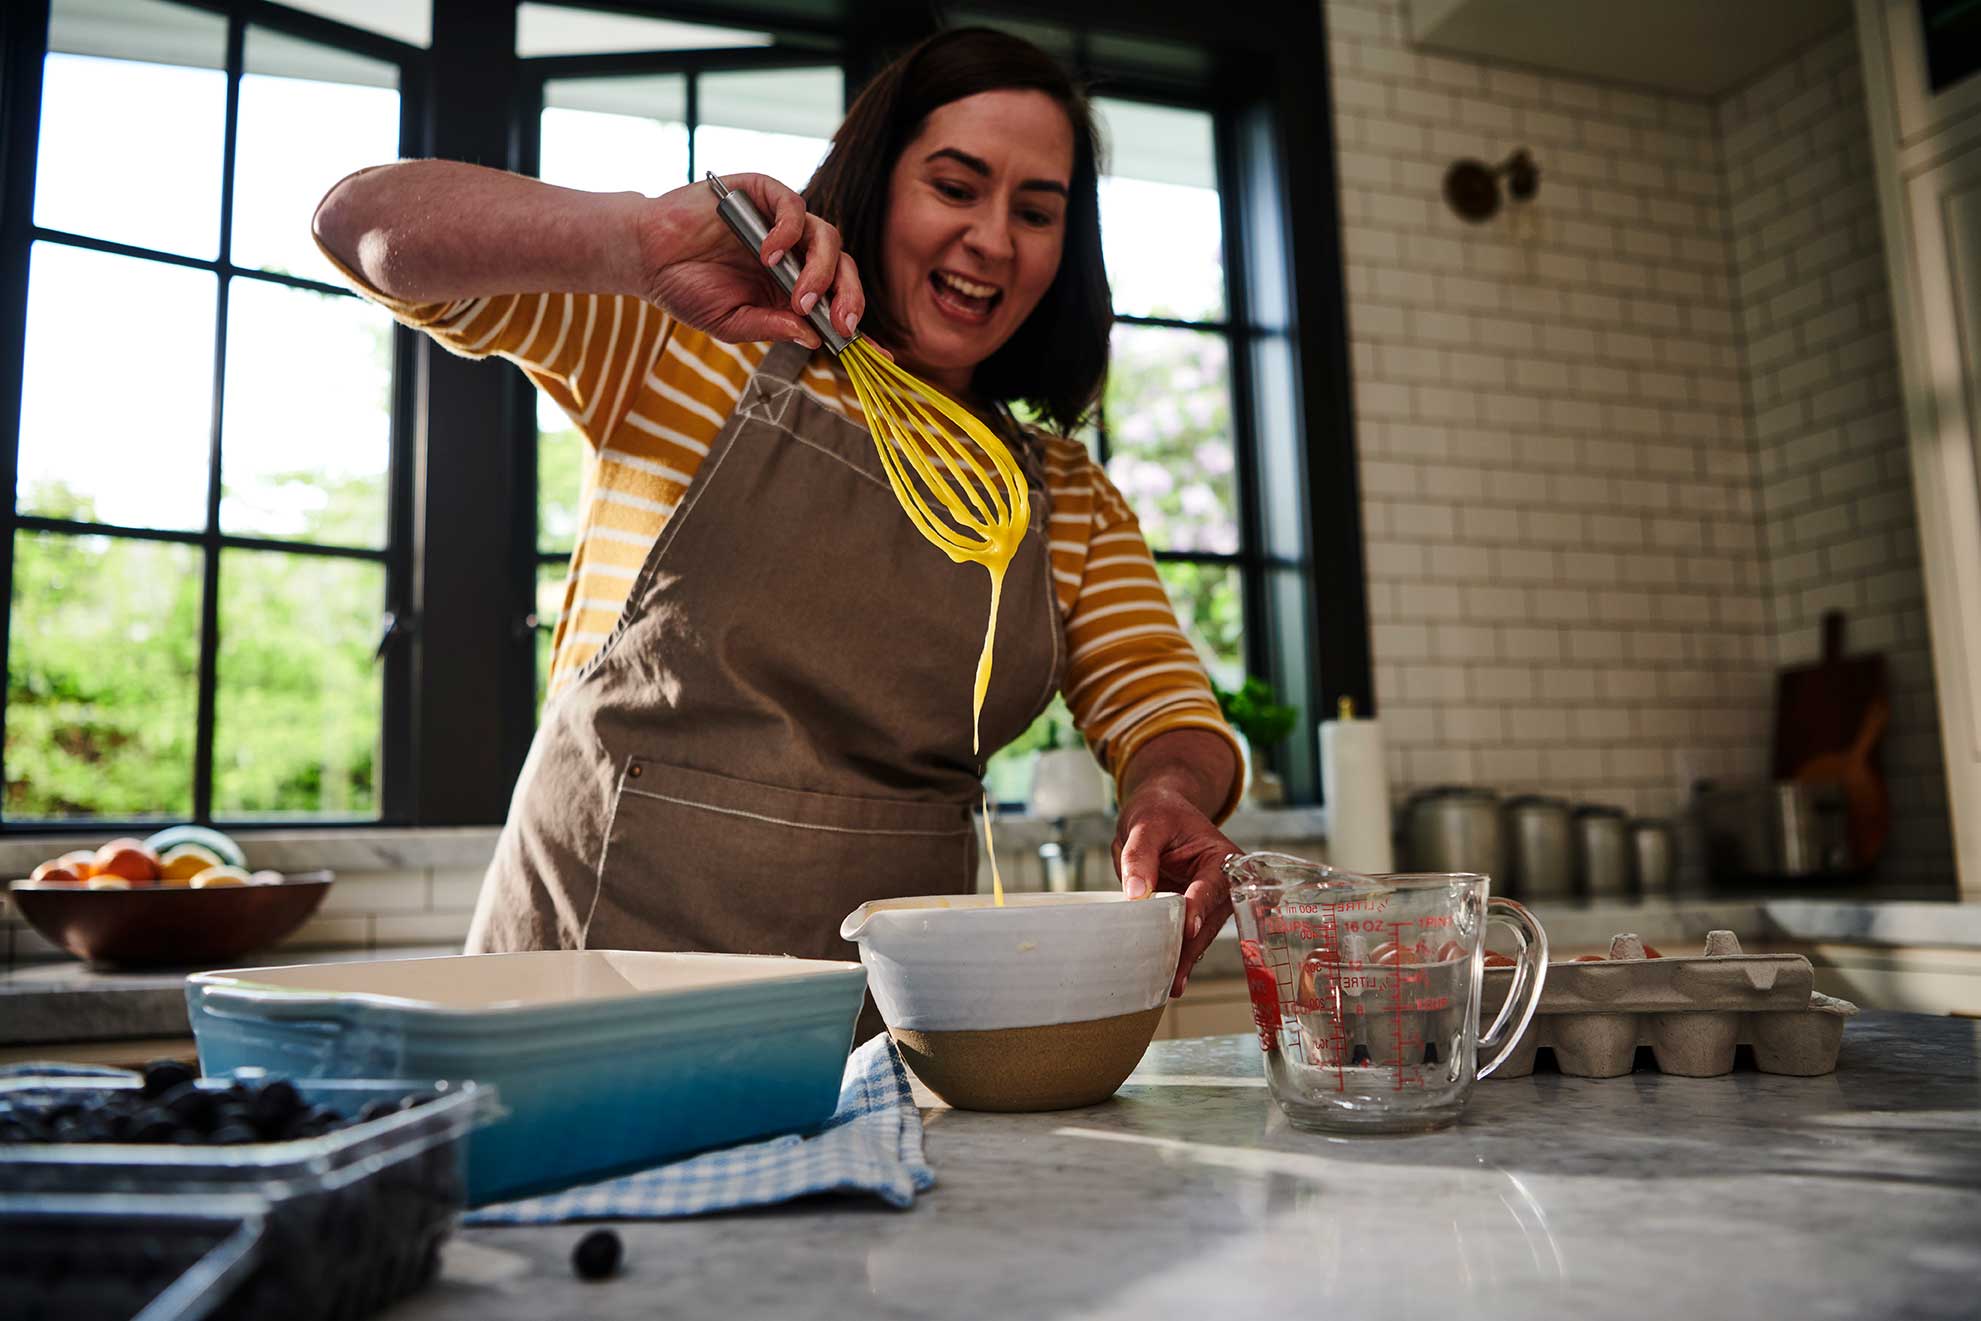 A woman in the kitchen smiling as she prepares Meyer Lemon Bar batter with a whisk and mixing bowl.